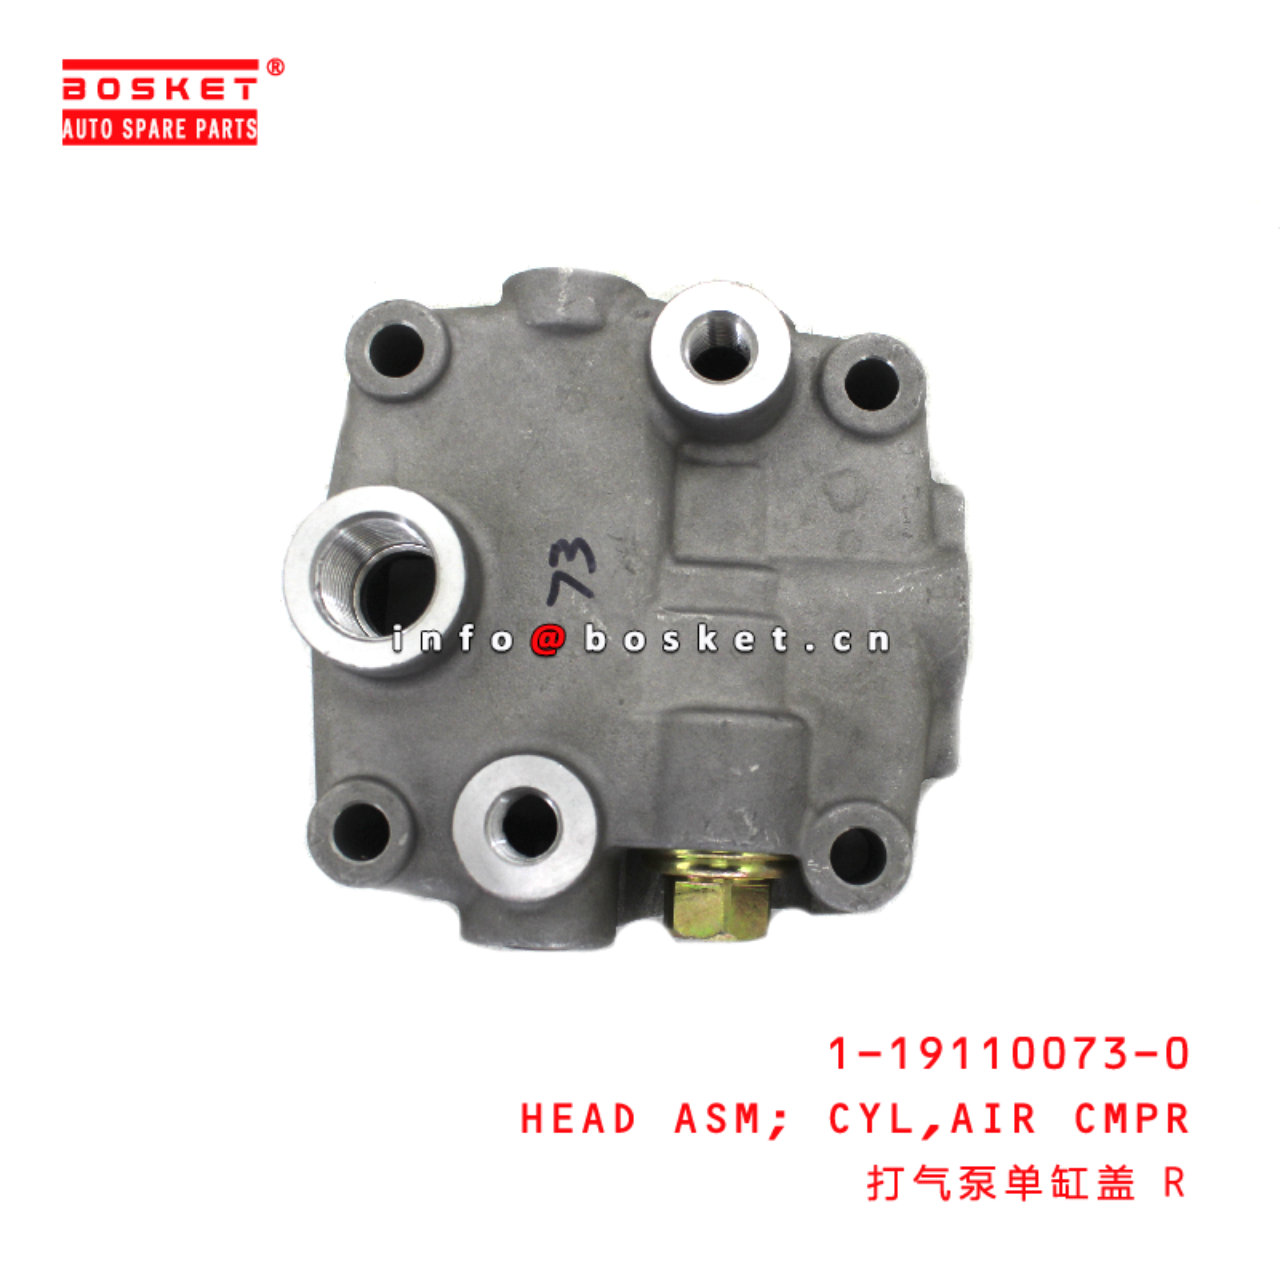 1-19110073-0 Air Compressor Cylinder Head Assembly...